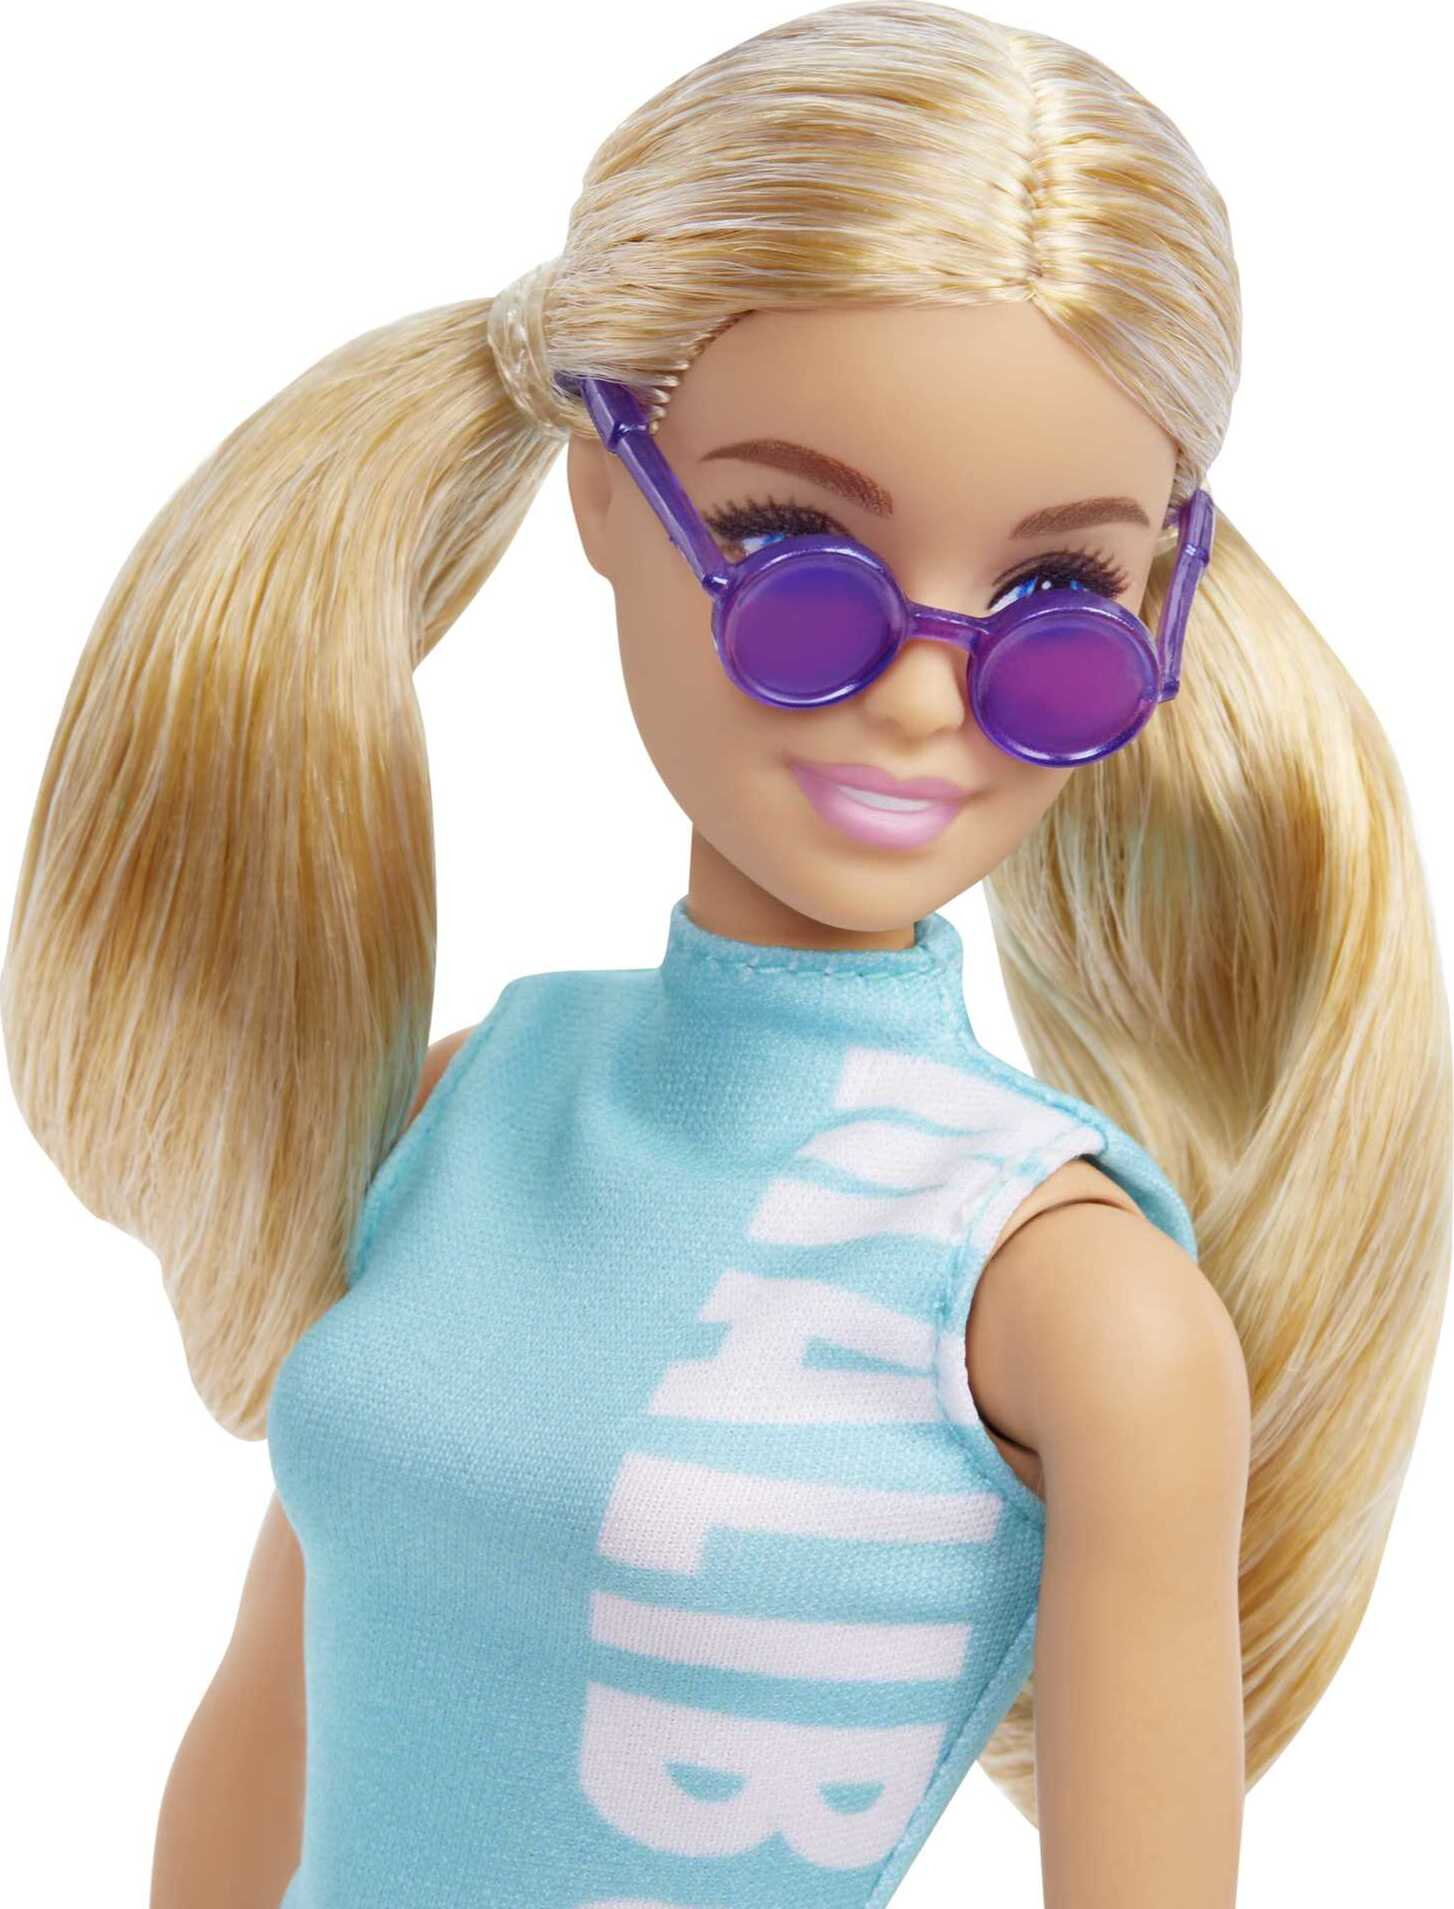 Barbie Fashionistas Doll #158 in Teal Top & Leggings with Blonde Pigtails, Sneakers & Sunglasses - image 5 of 7